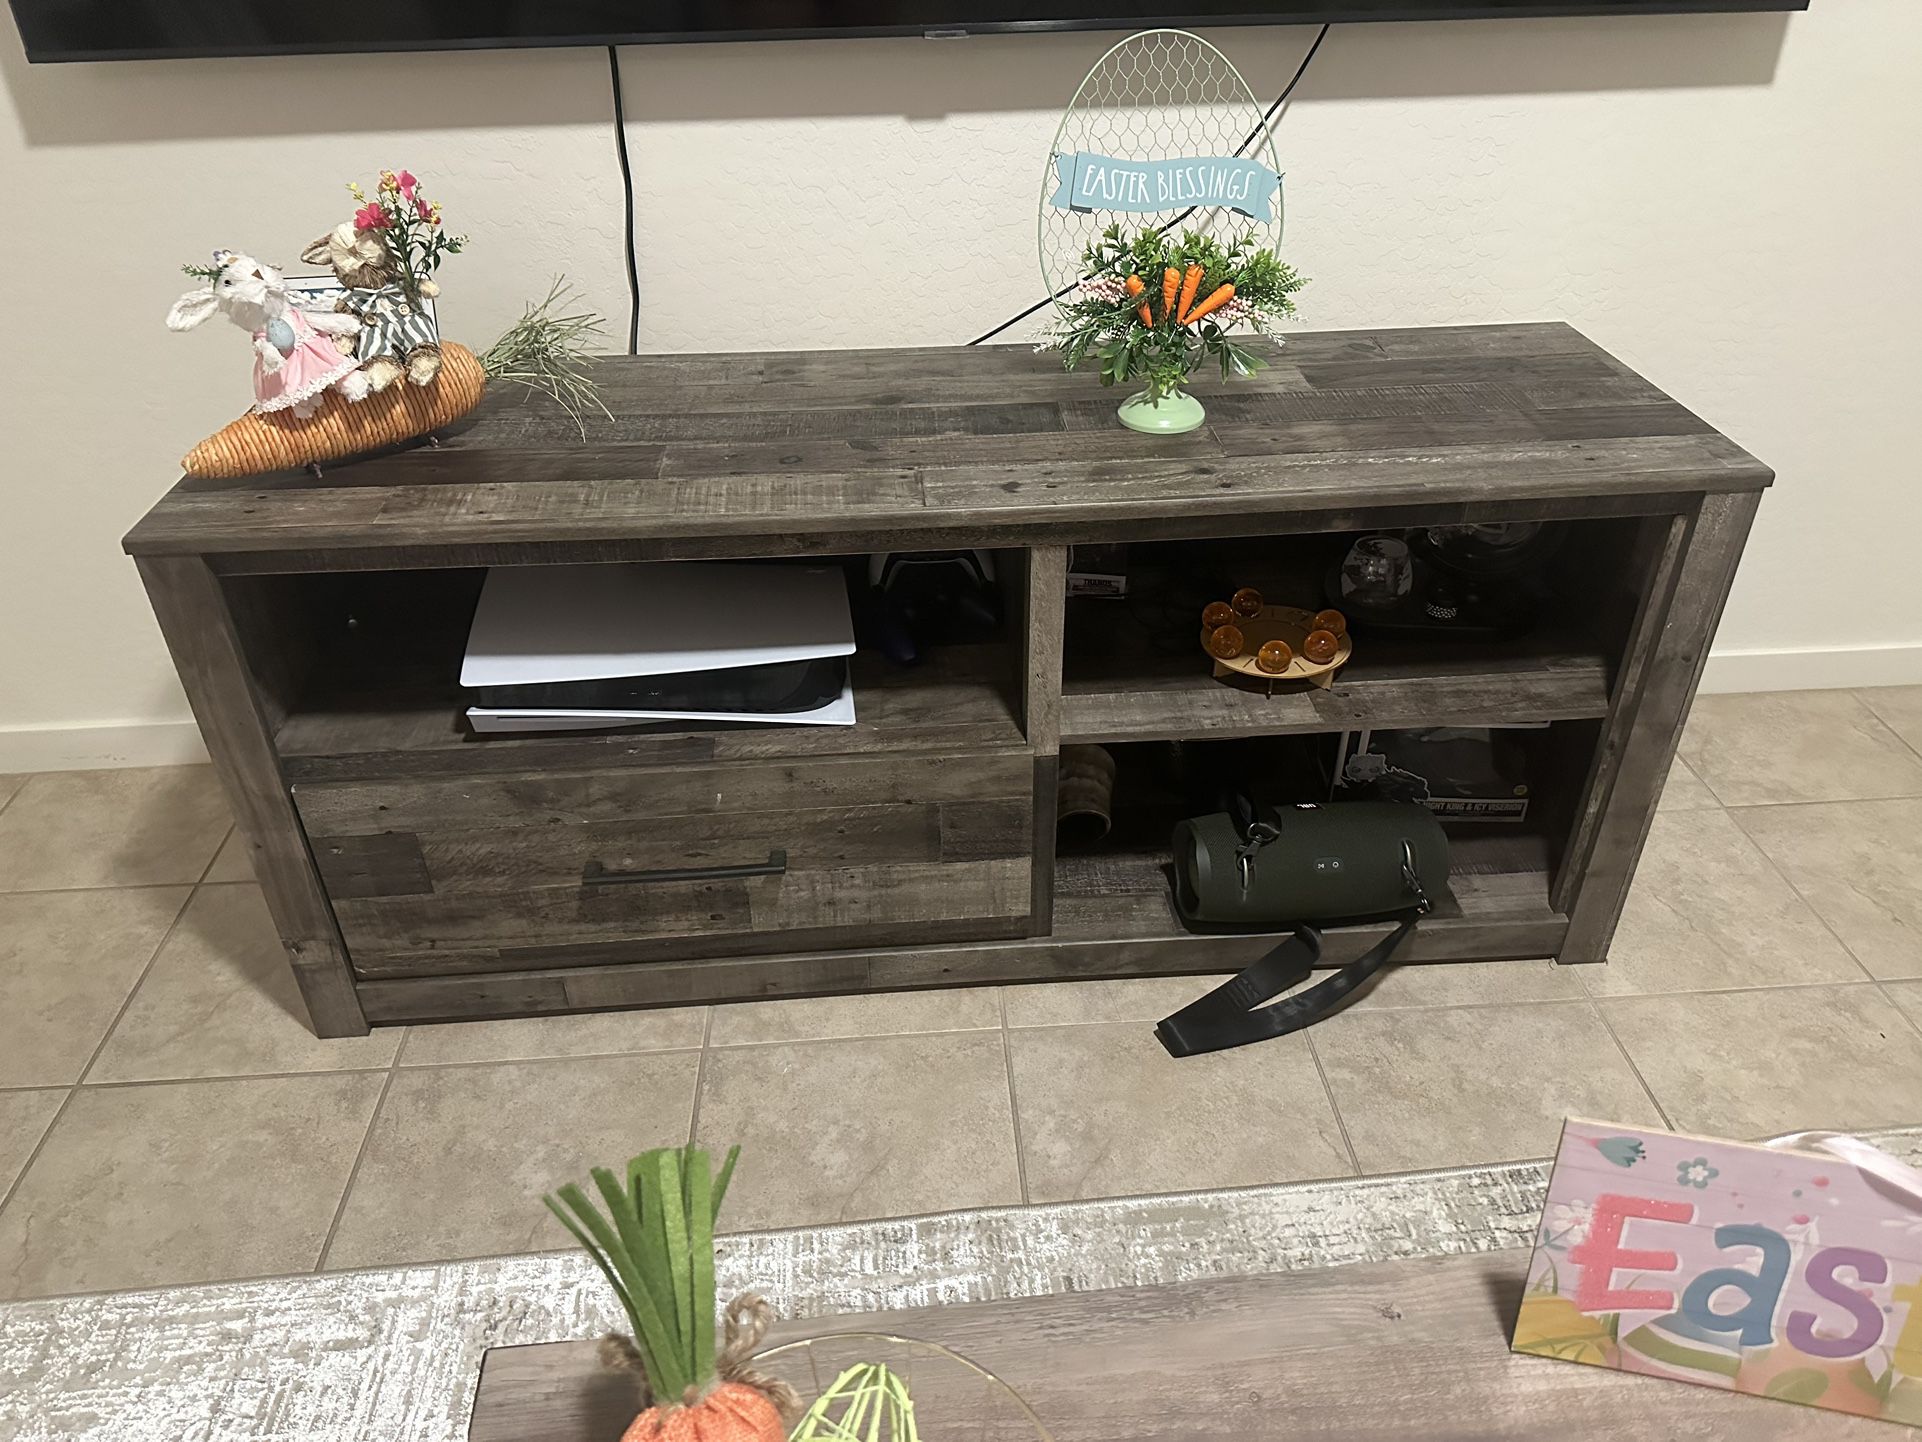 Tv Console & Coffee table 